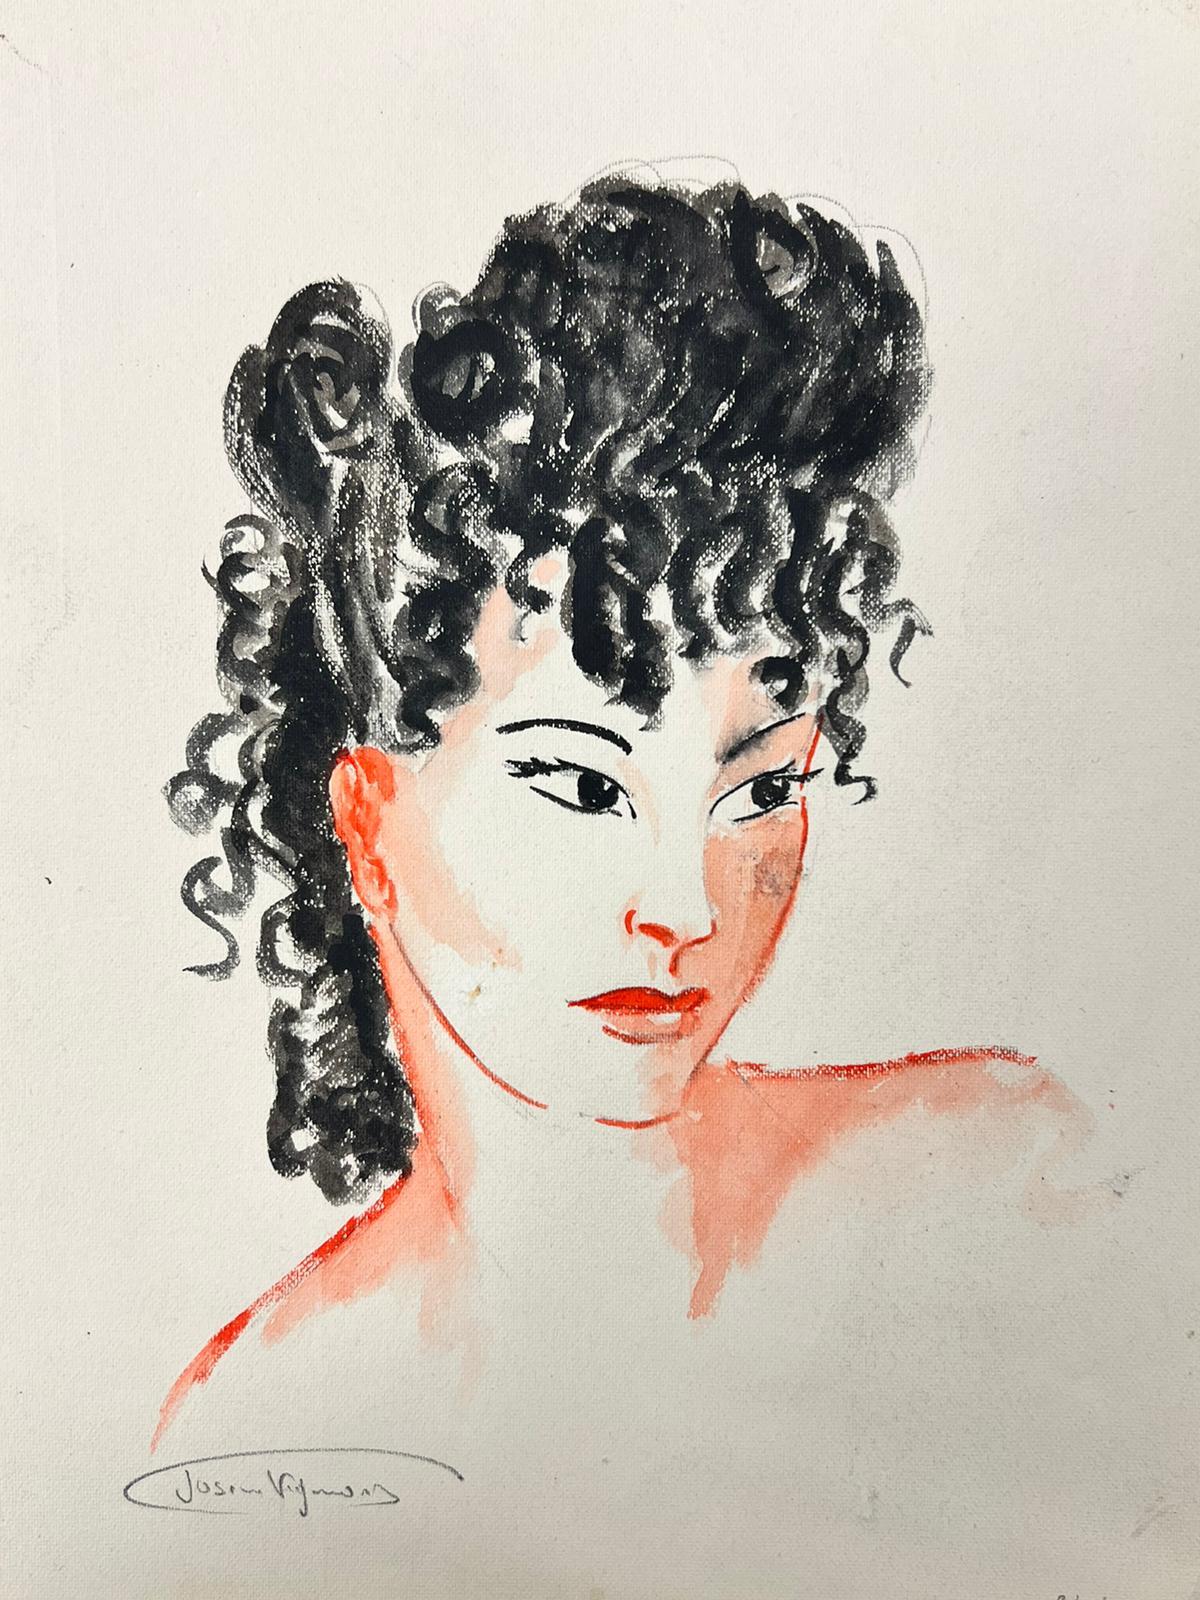 1950’s Fashion Illustration Original Portrait Of A Lady With Black Curly Hair - Painting by Josine Vignon